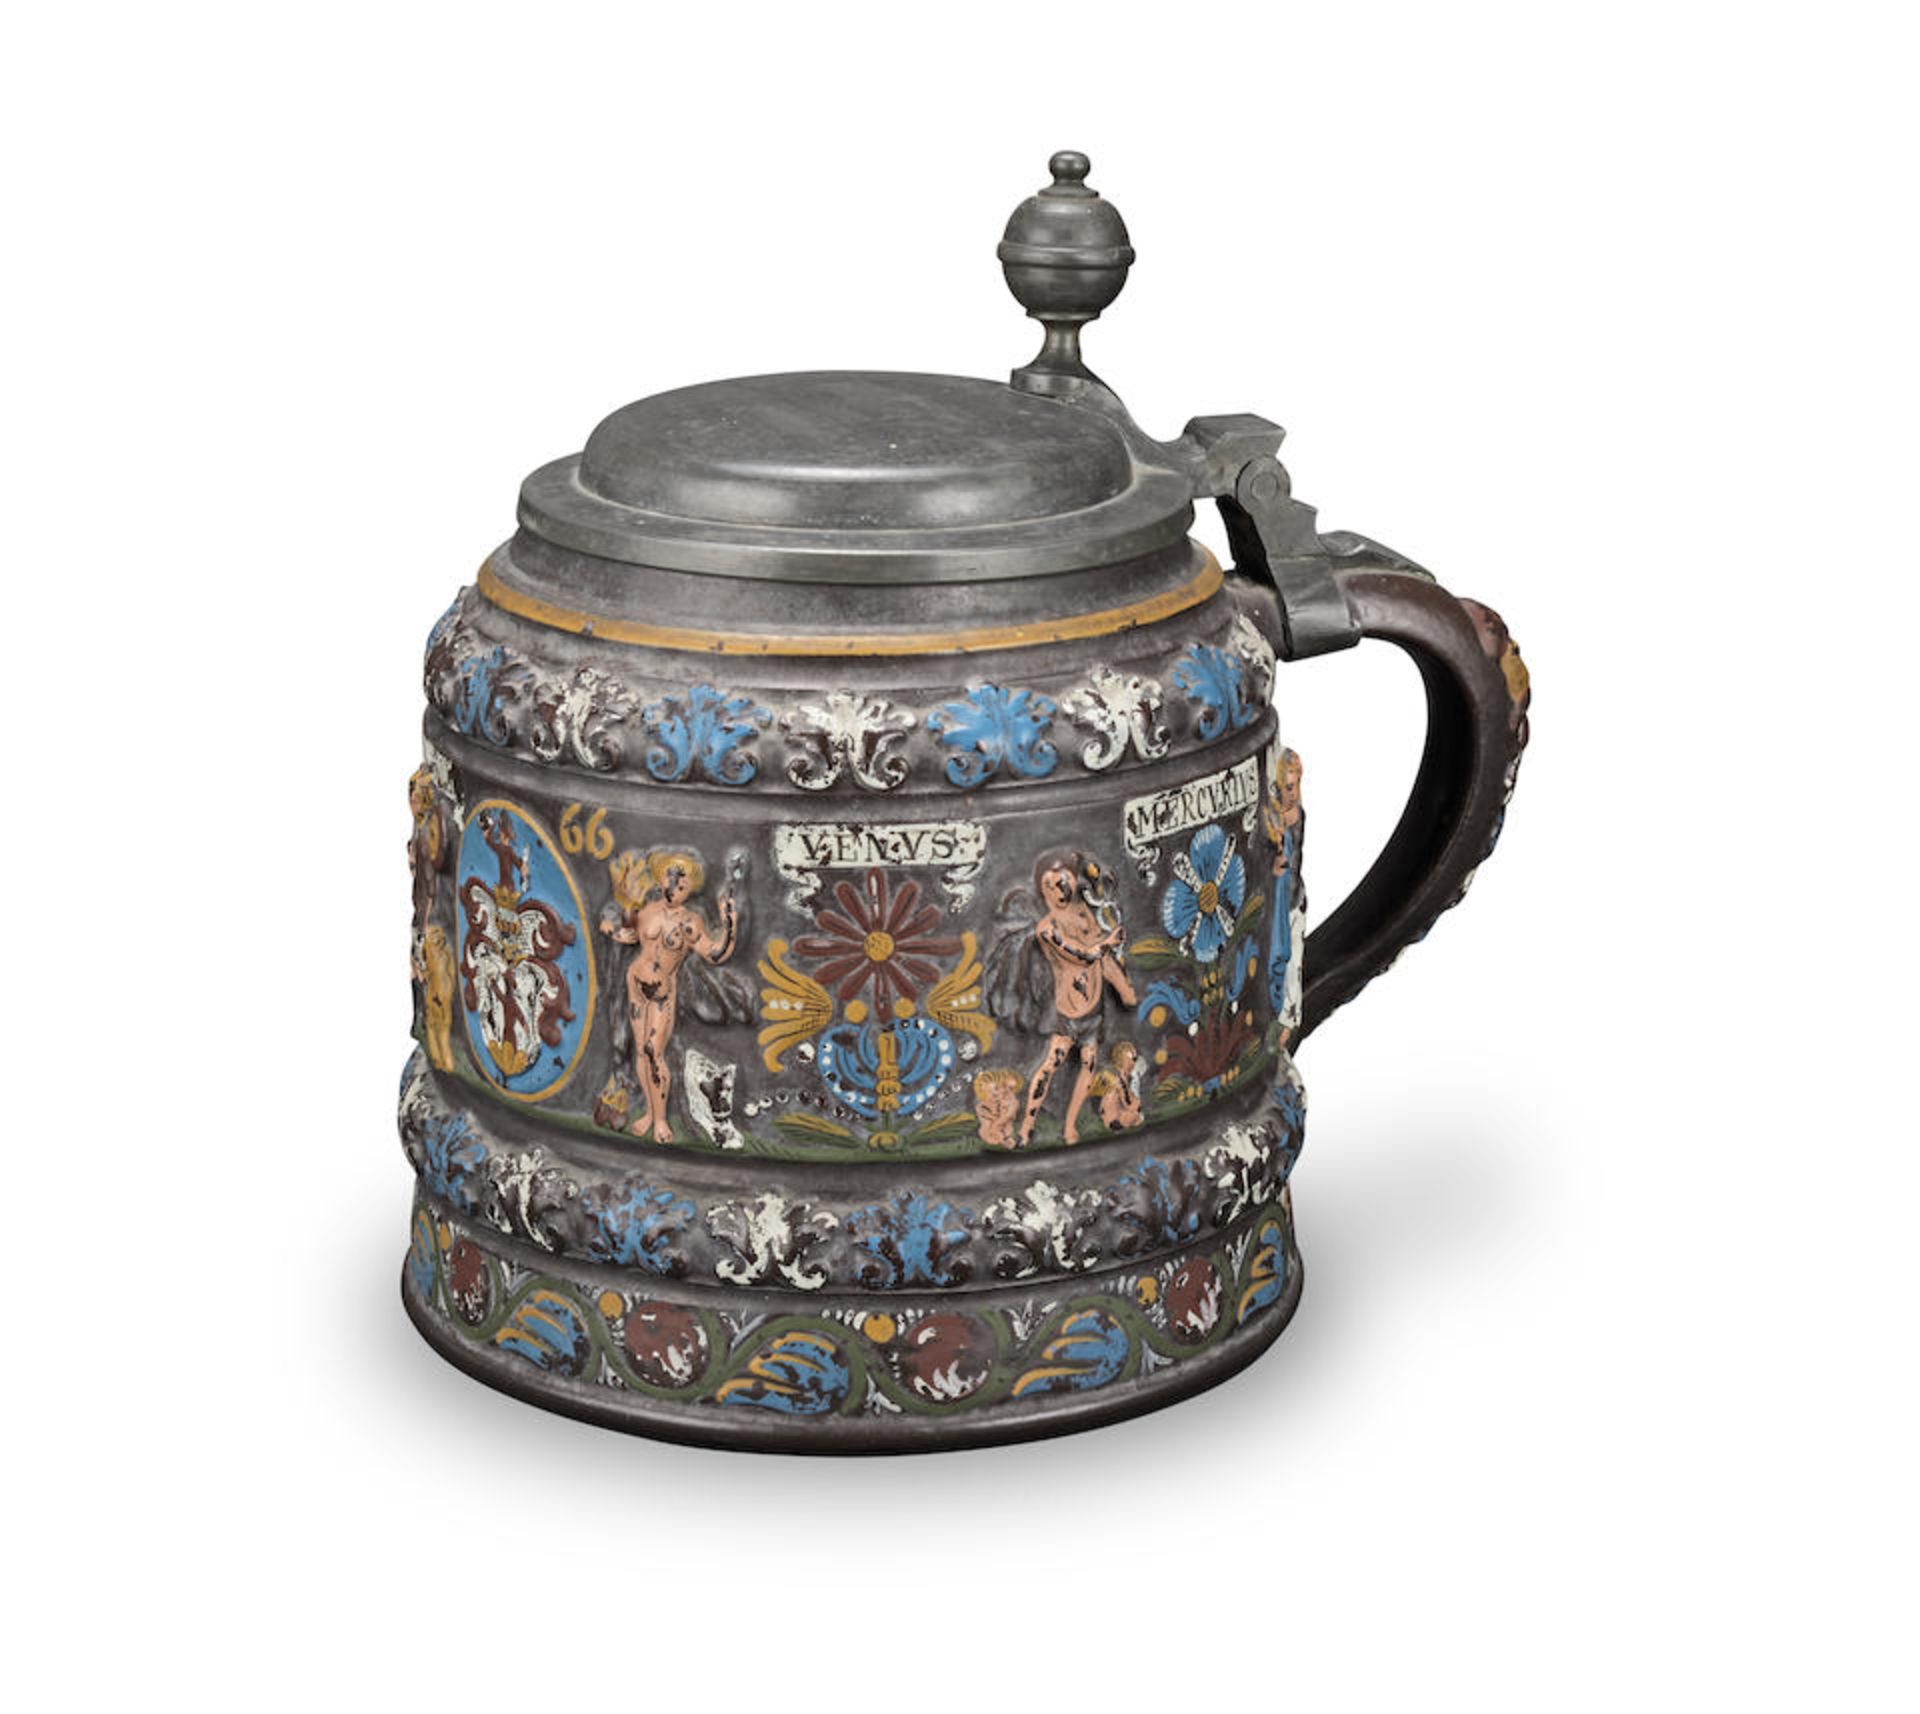 A 19th century pewter mounted Kreussen-ware tankard in the 17th century style